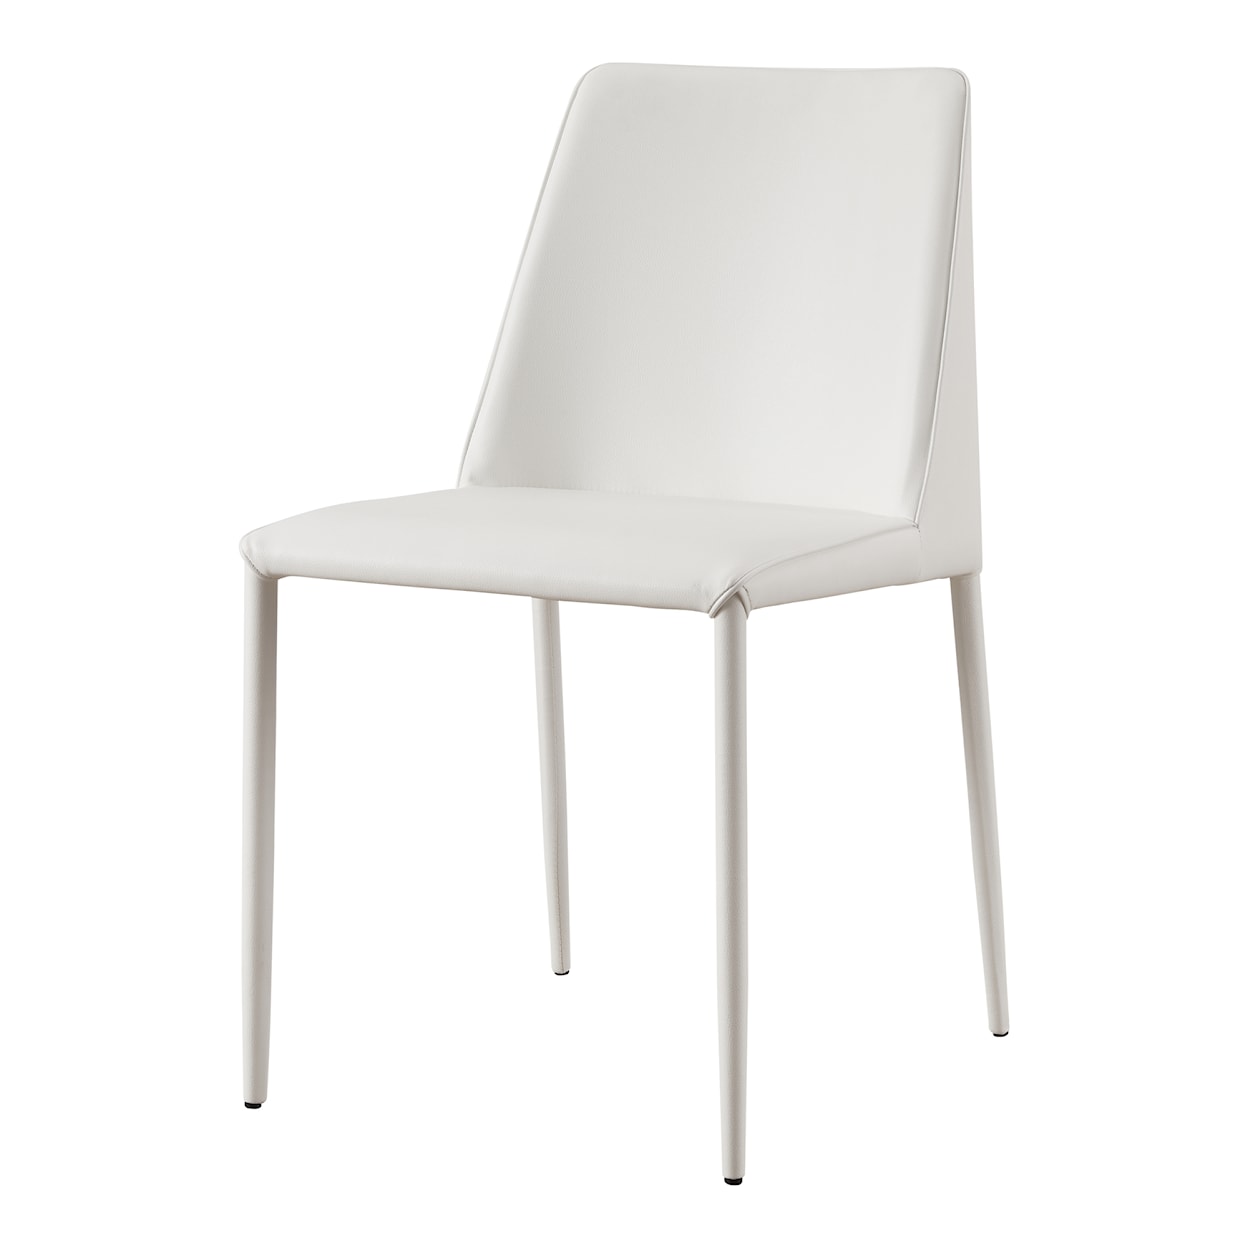 Moe's Home Collection Nora White Vegan Leather Dining Chair